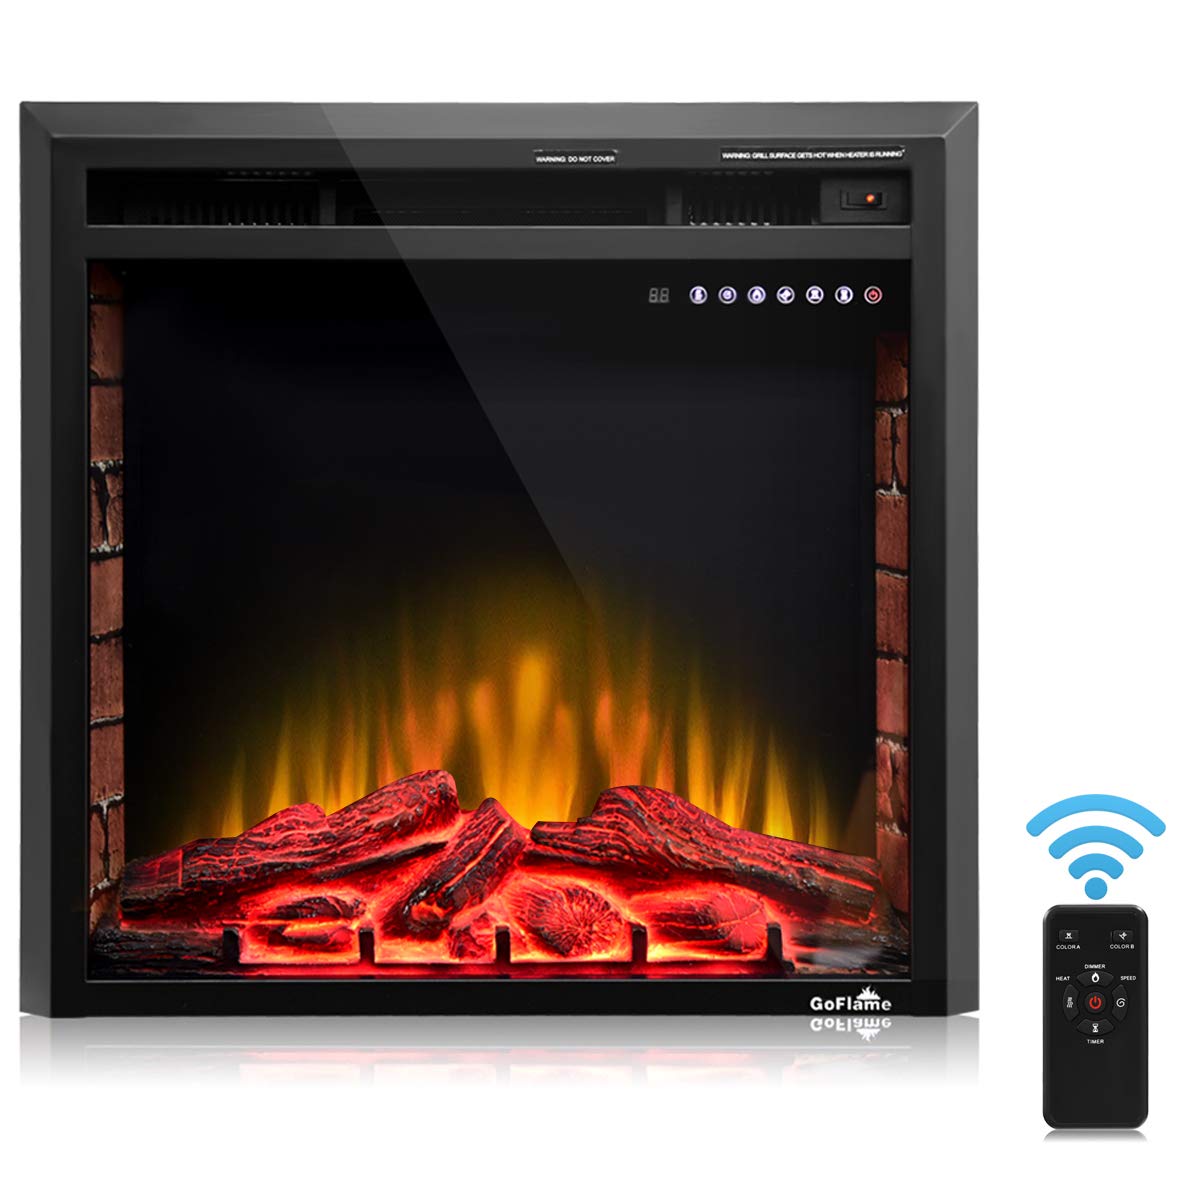 Modern Electric Fireplace Freestanding Unique Best fort Recessed 36" Electric Fireplace Multi Operating Electric Fireplace Insert with Remote 750w 1500w Built In Electric Fireplace